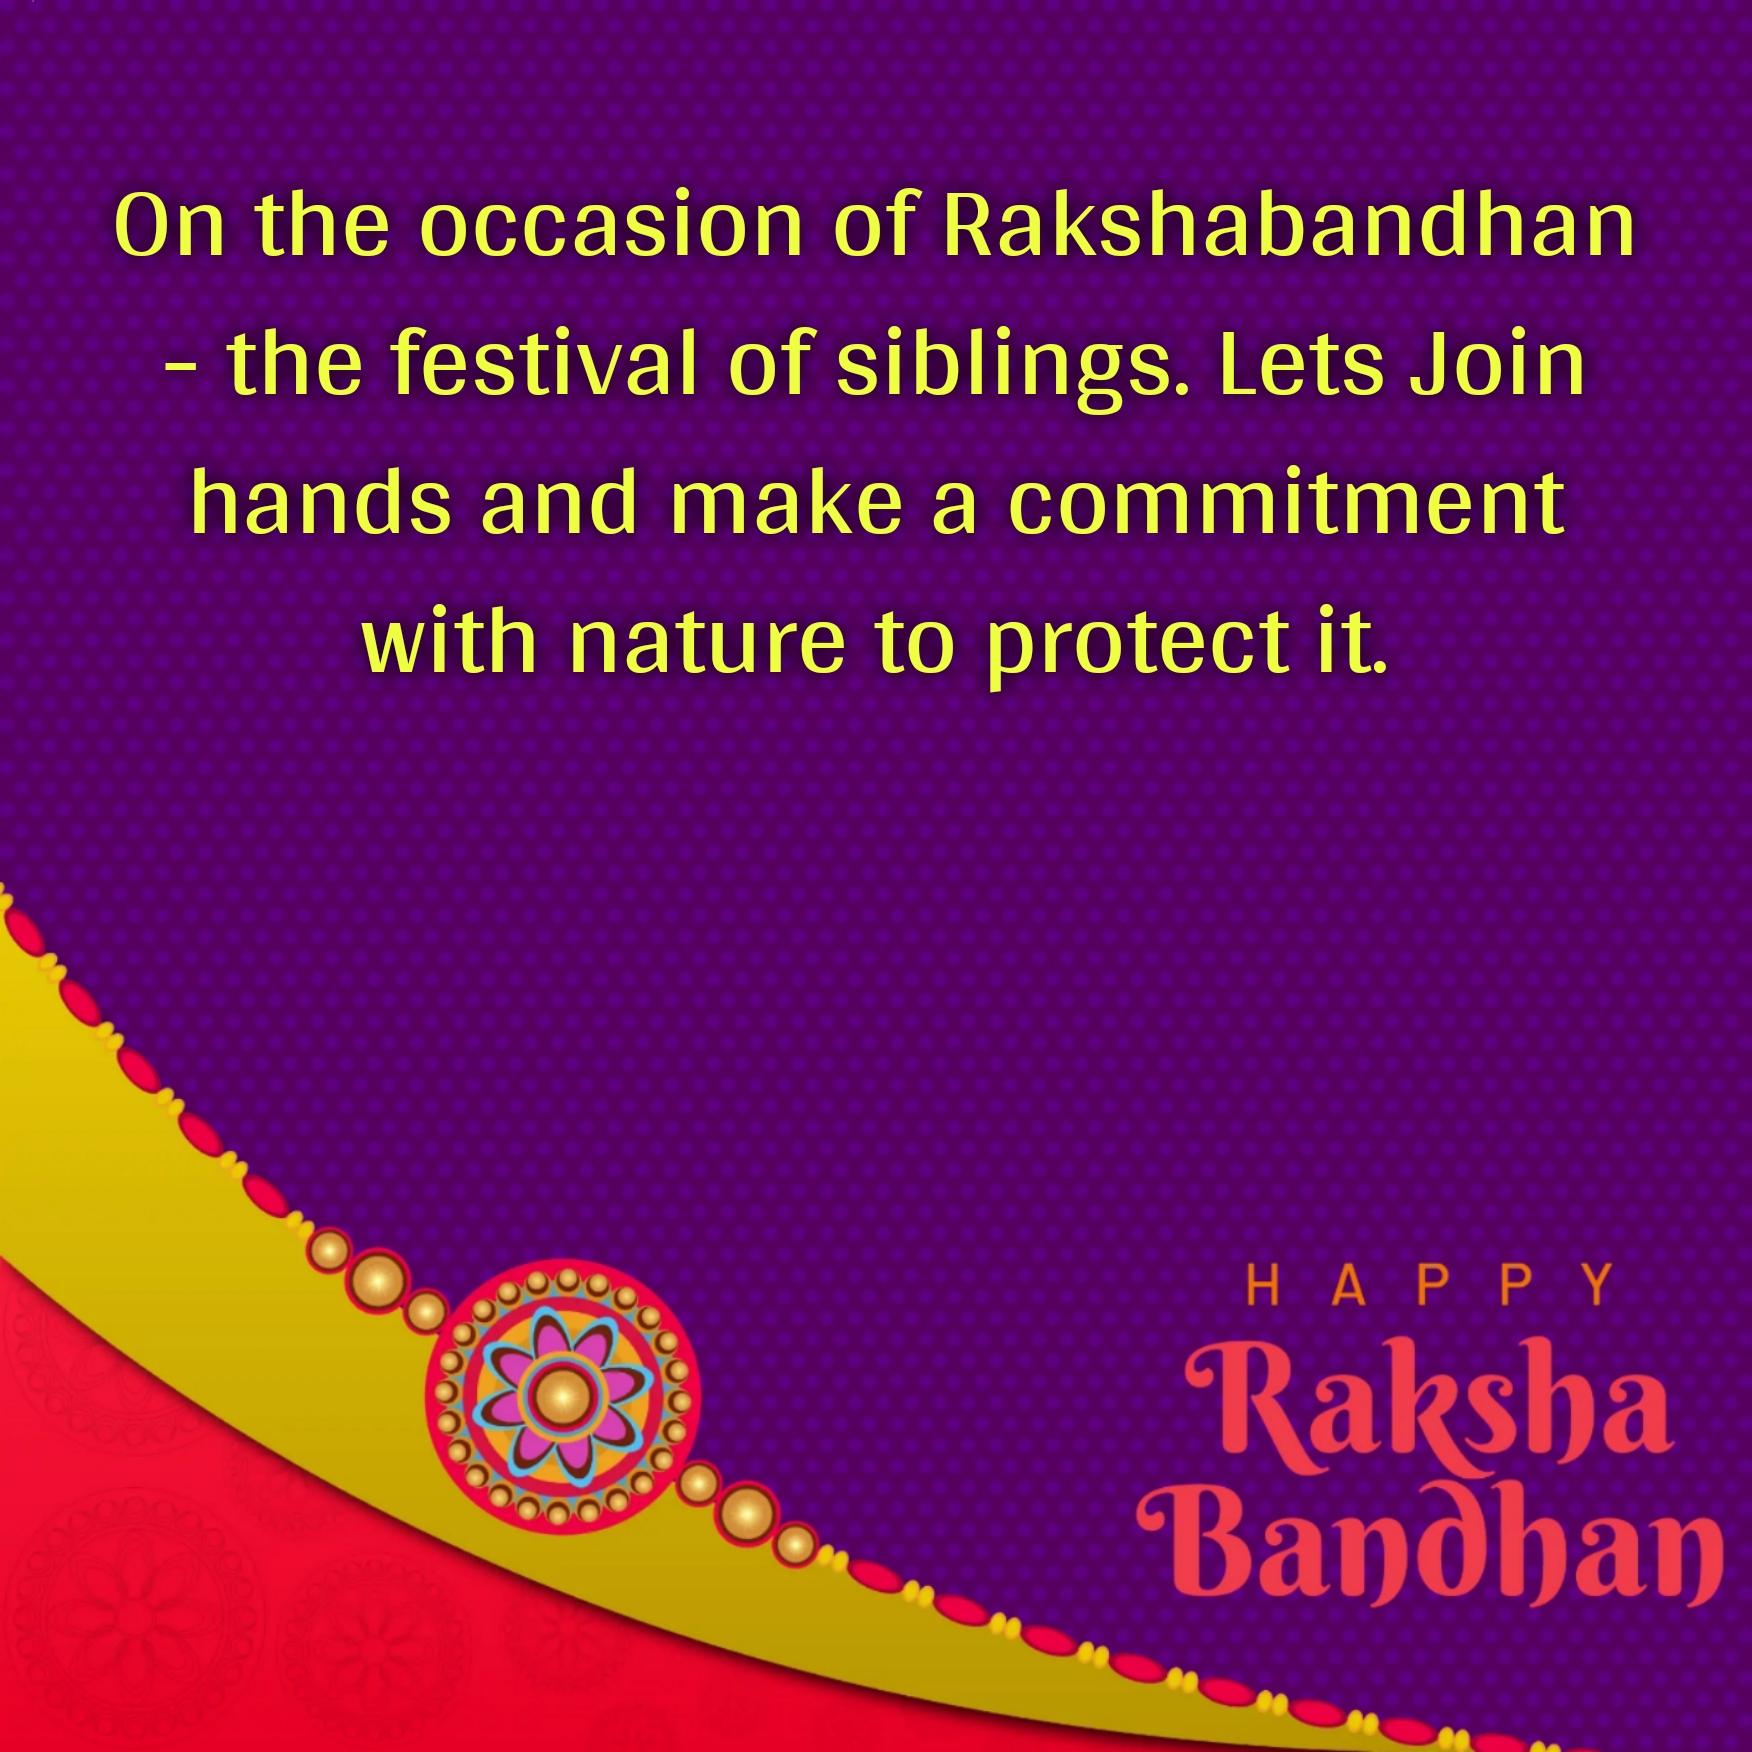 On the occasion of Rakshabandhan - the festival of siblings